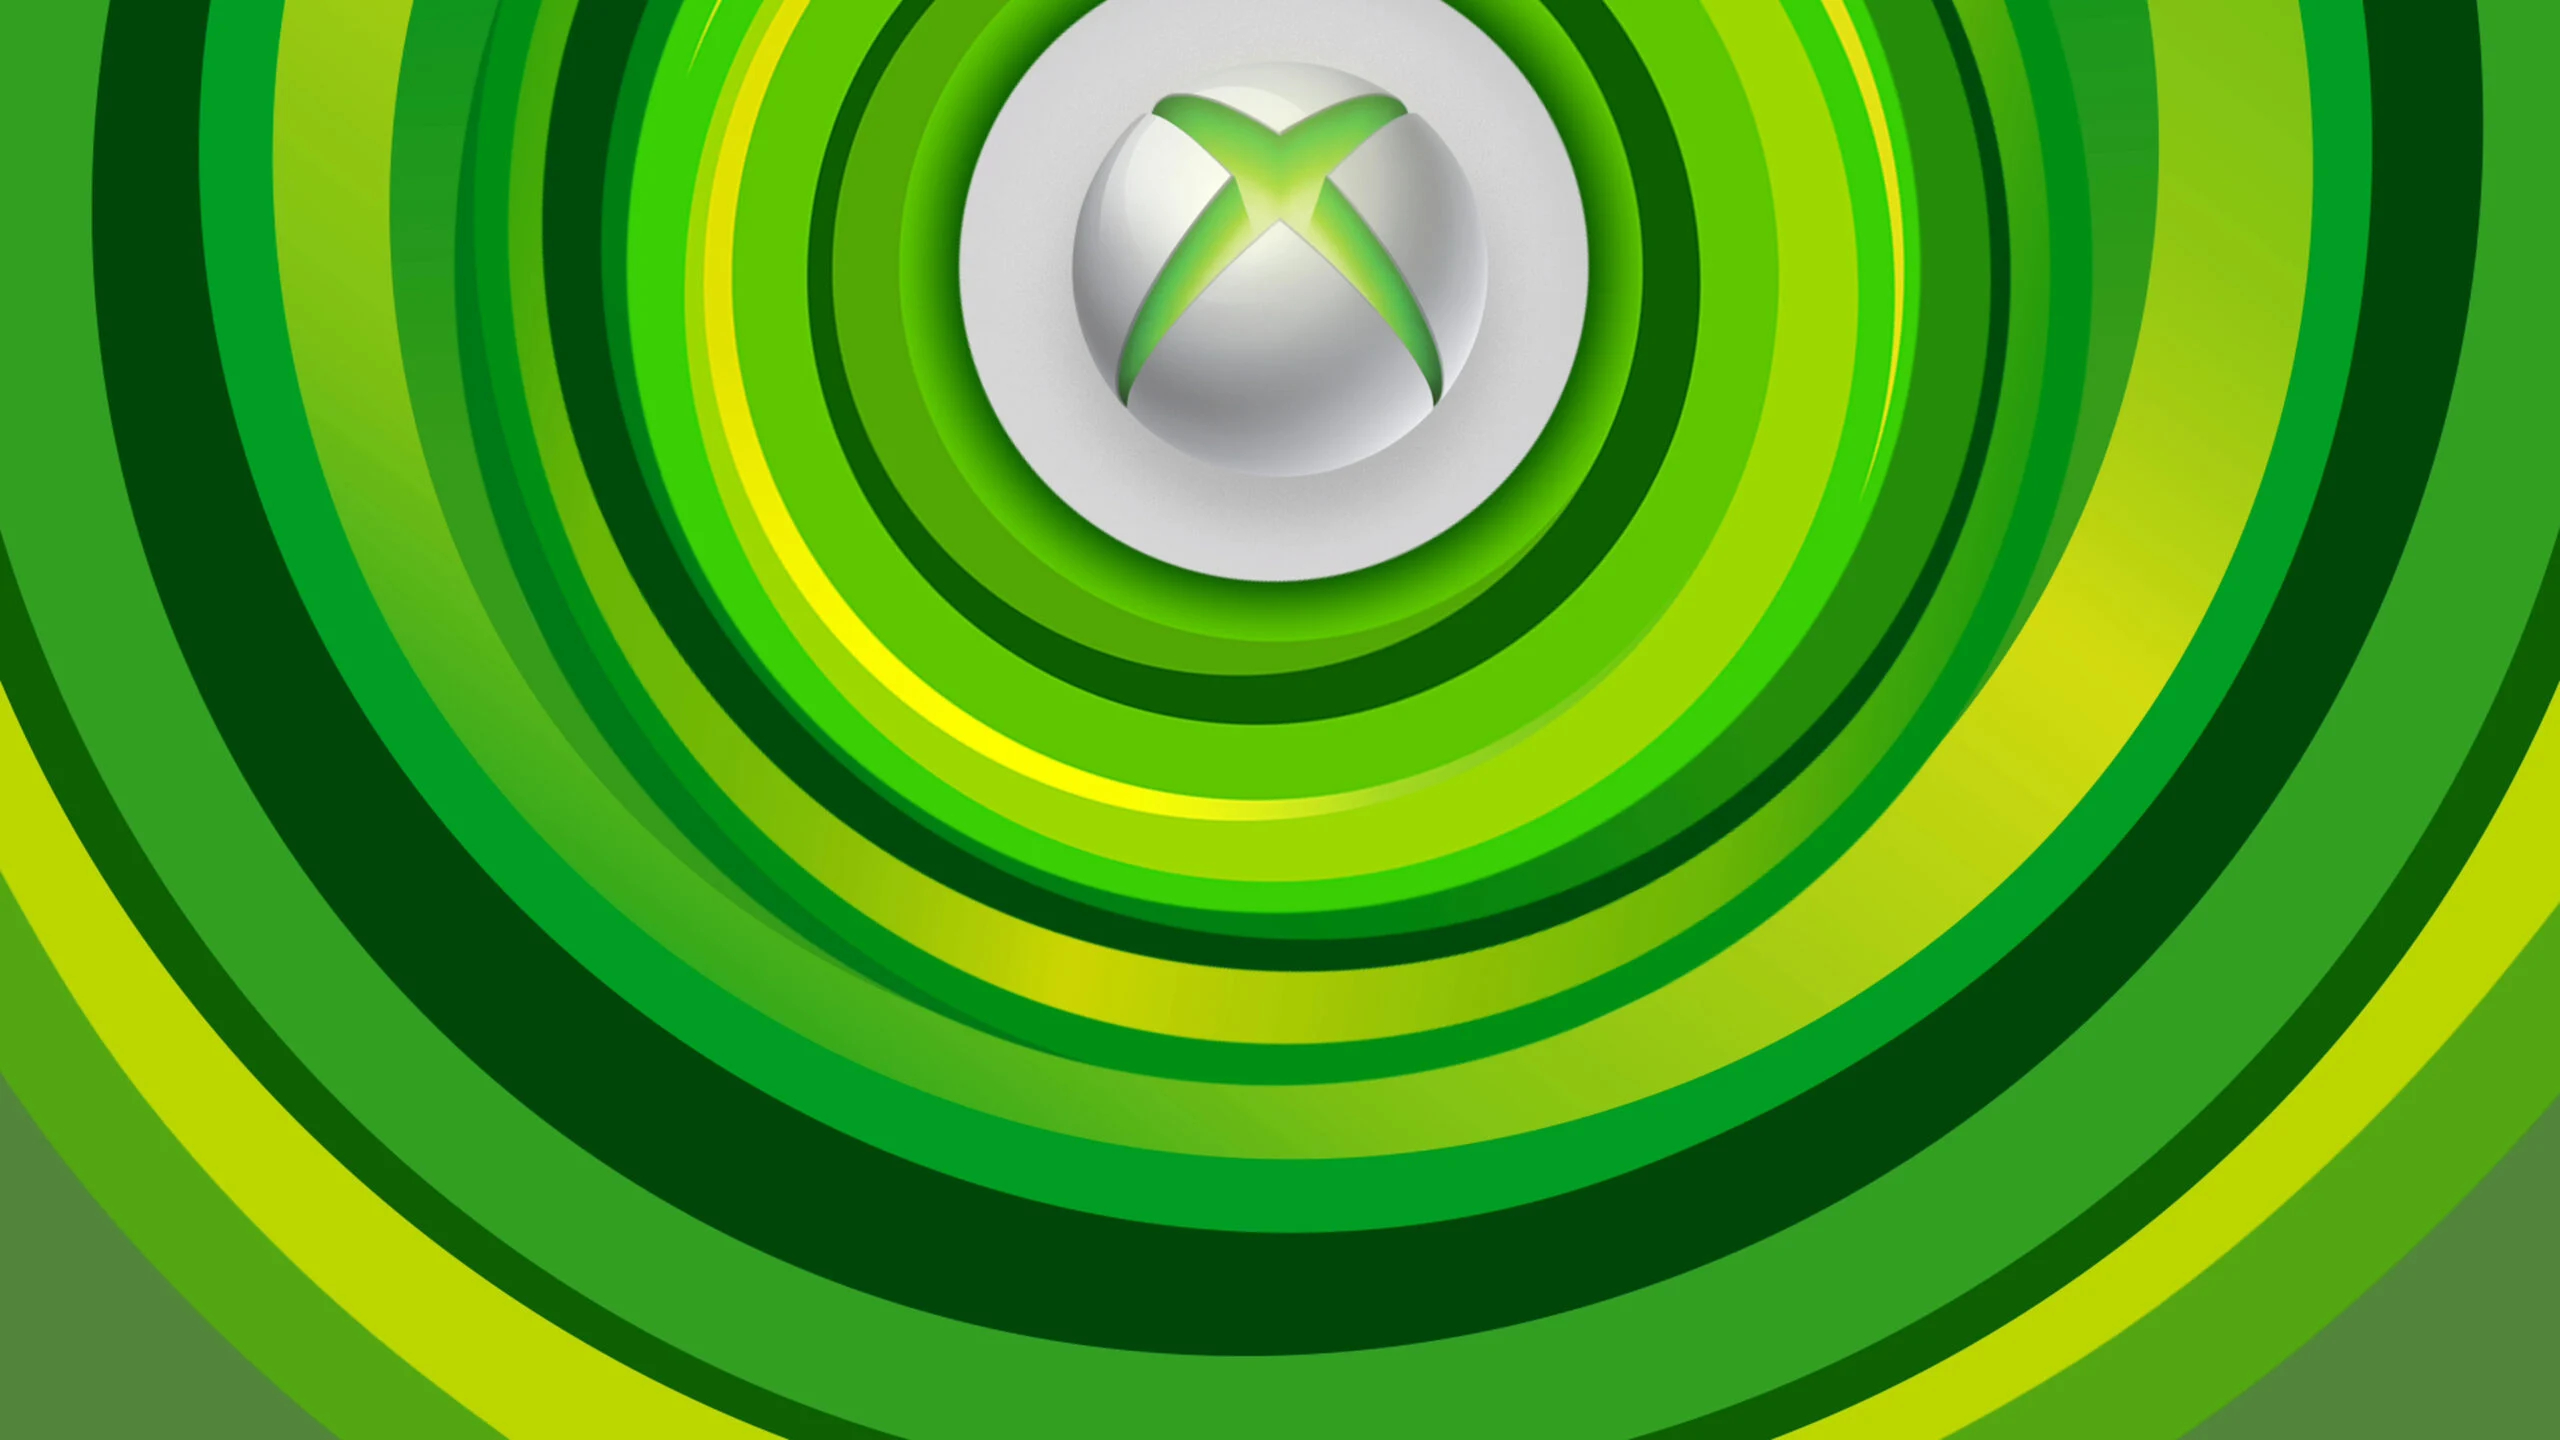 2560x1440 Xbox consoles now have a new Xbox 360 dynamic theme | VGC